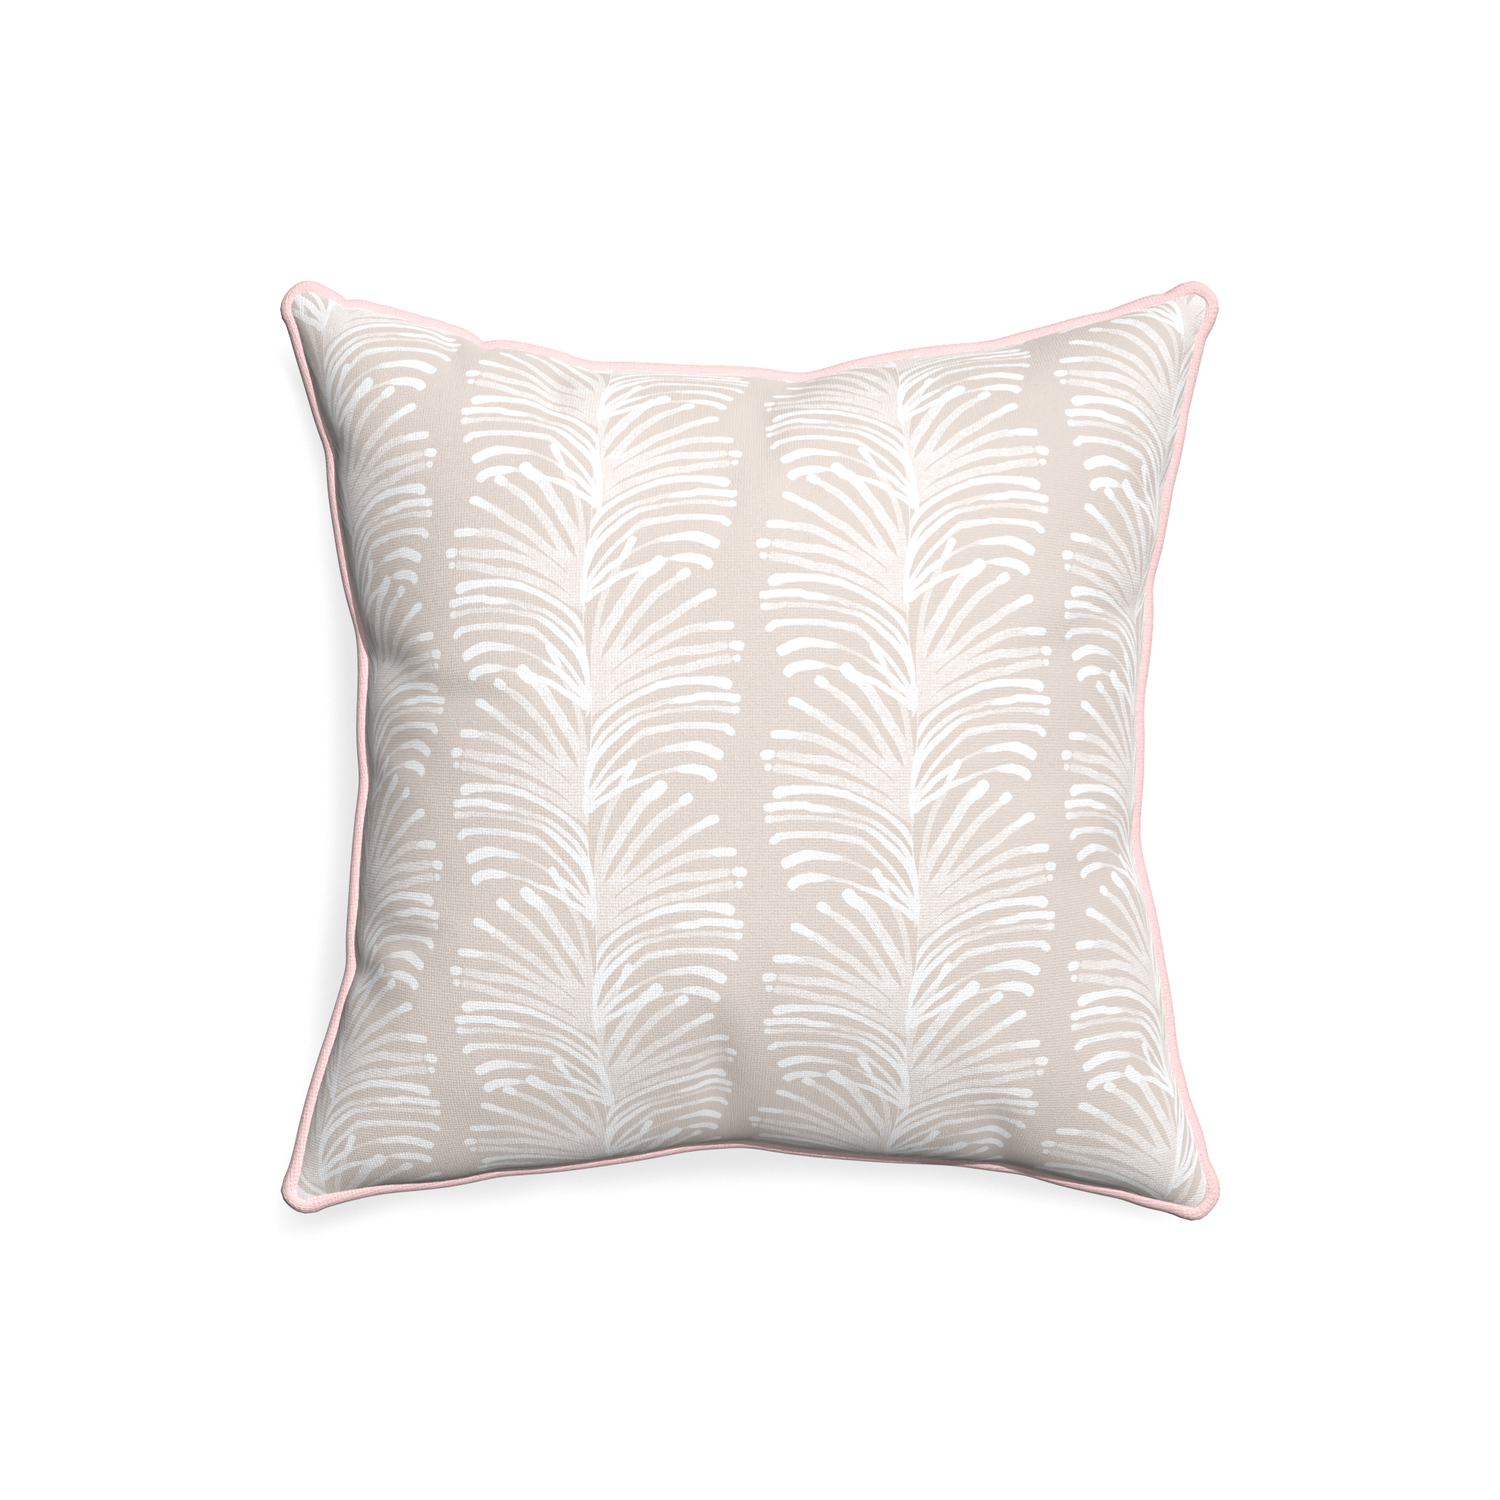 20-square emma sand custom pillow with petal piping on white background